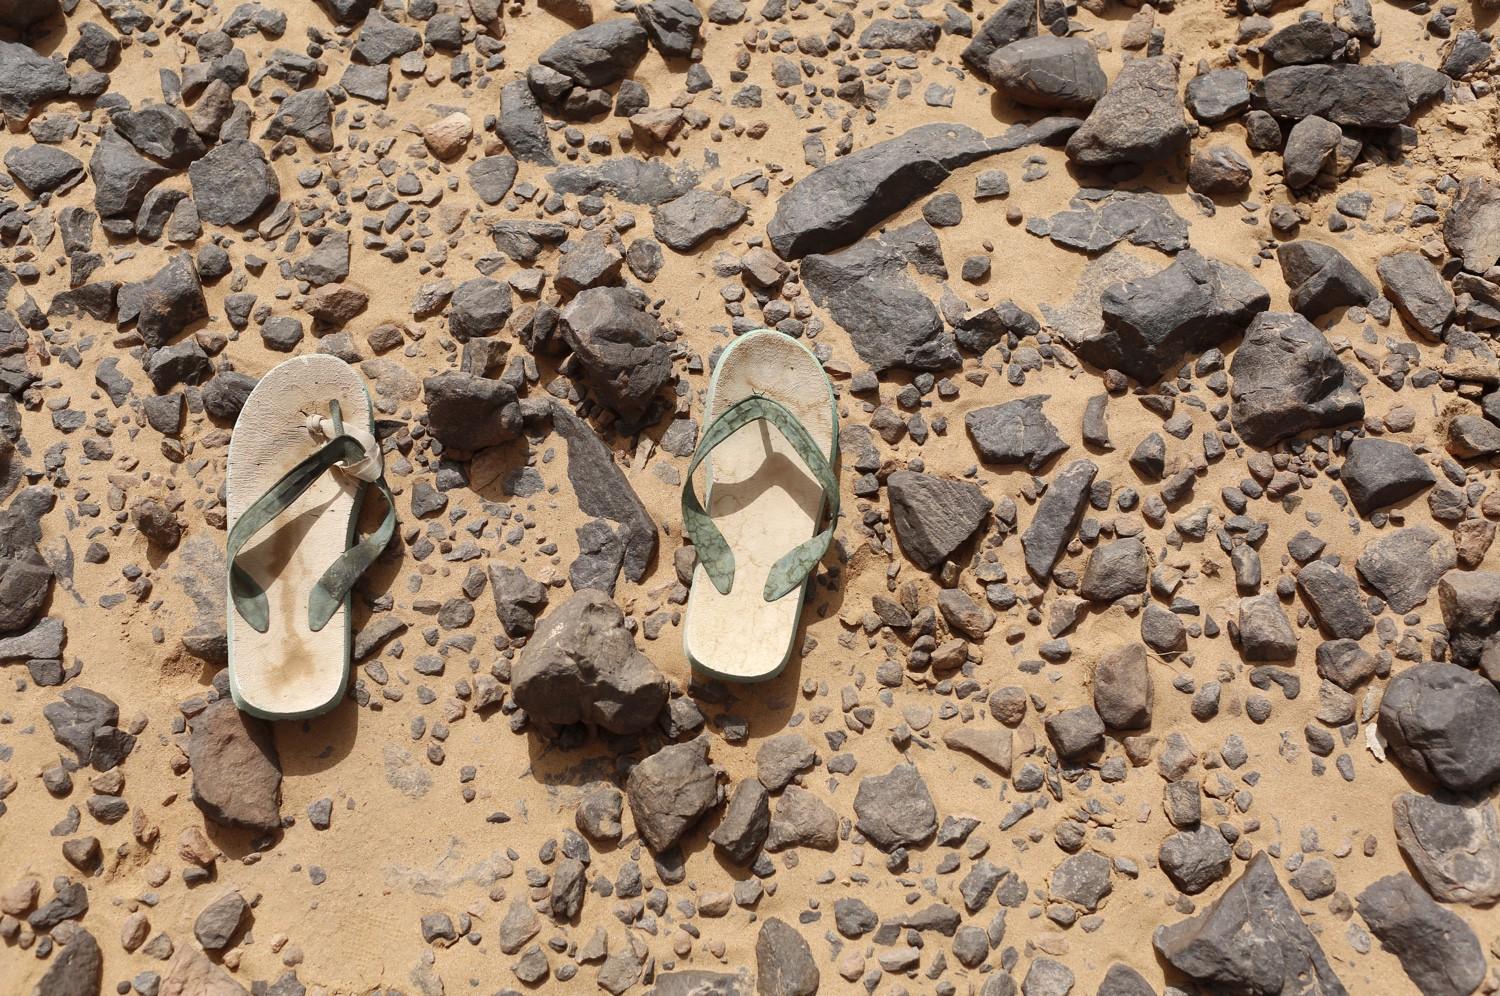 A pair of flip flops, left behind by a migrant, lies on the ground in the Sahara Desert near the border of Algeria and Libya.